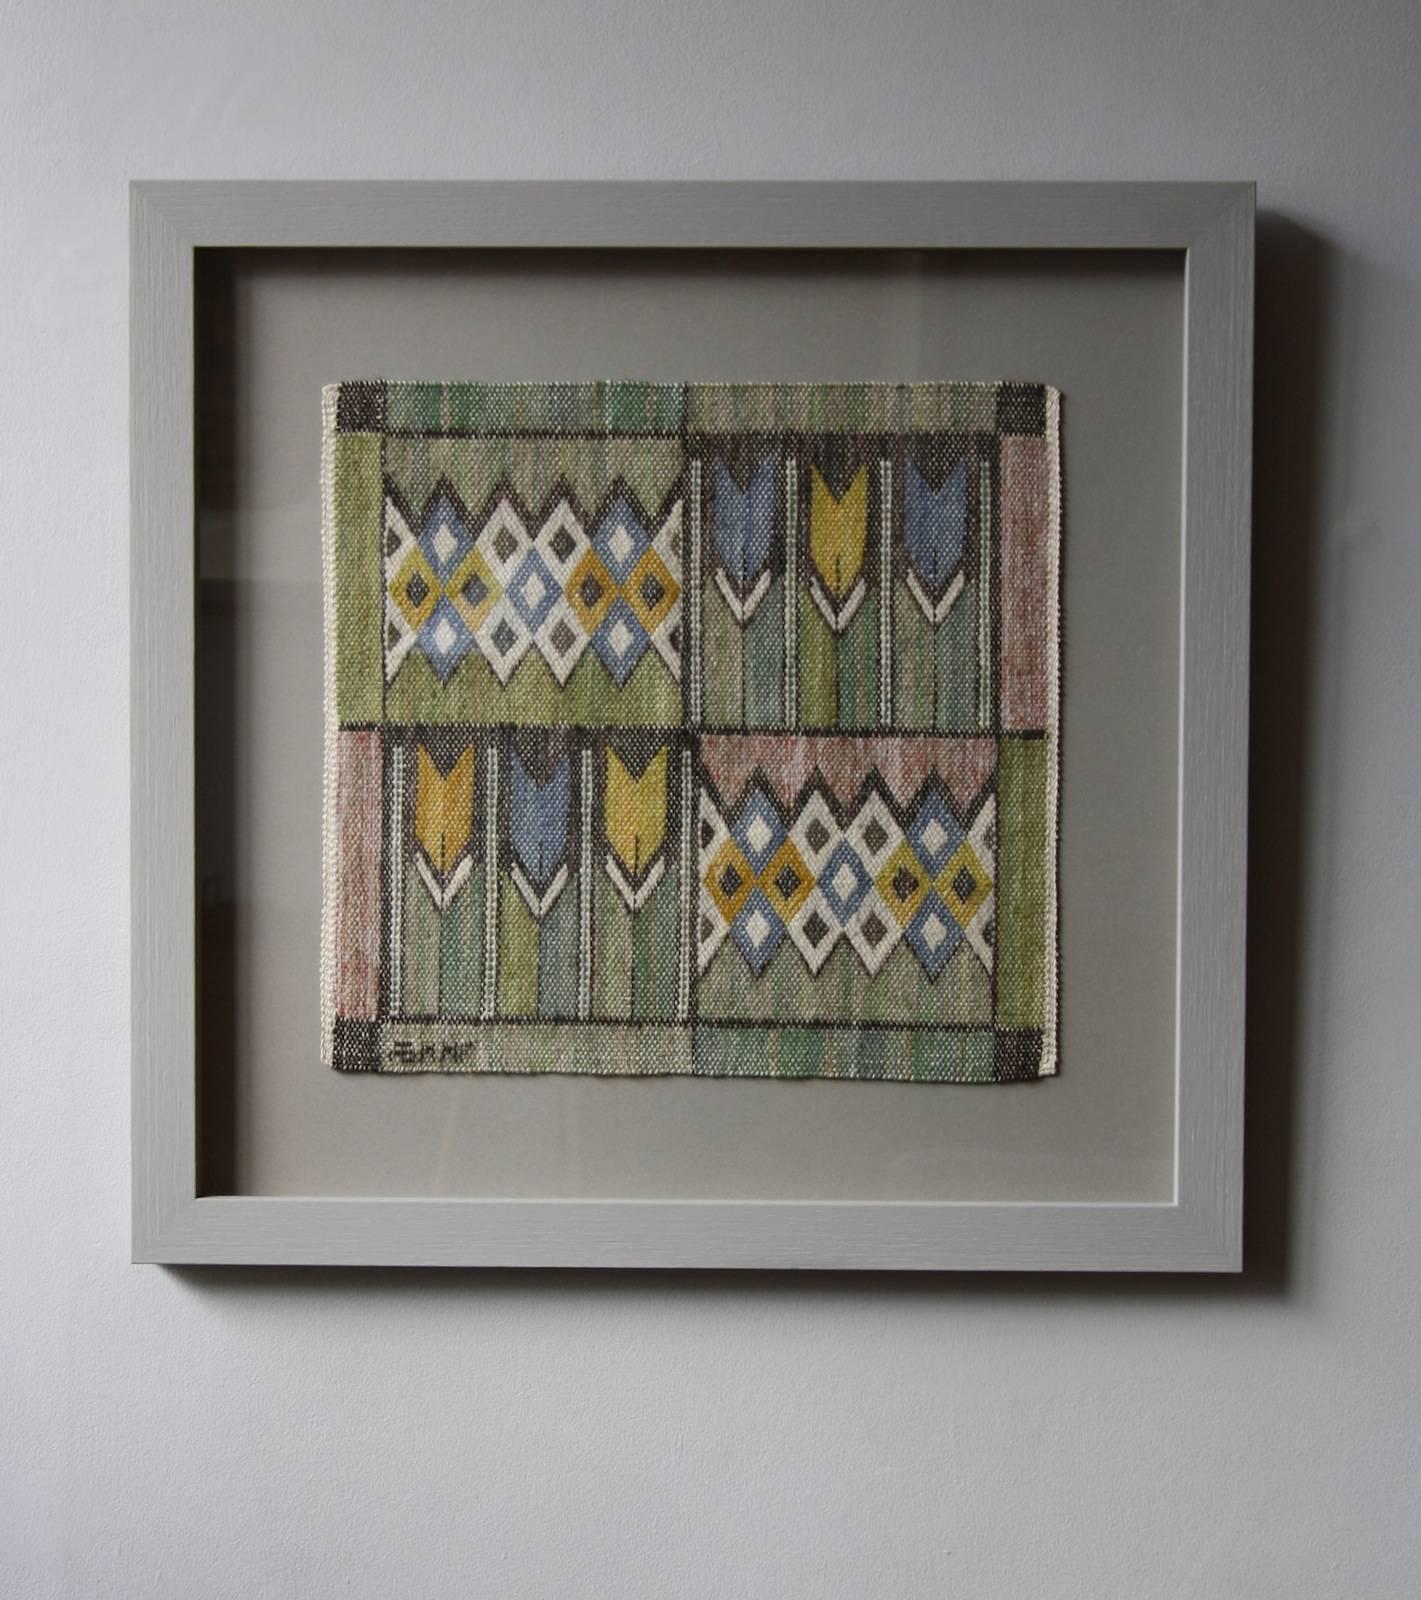 A vintage mid-20th century handwoven textile from Marta Maas-Fjetterström’s workshop in Båstad, Sweden, designed by Barbro Nilsson.
The tapestry features geometric diamonds and rectangles as well as six tulip flowers. The symmetrical arrangement